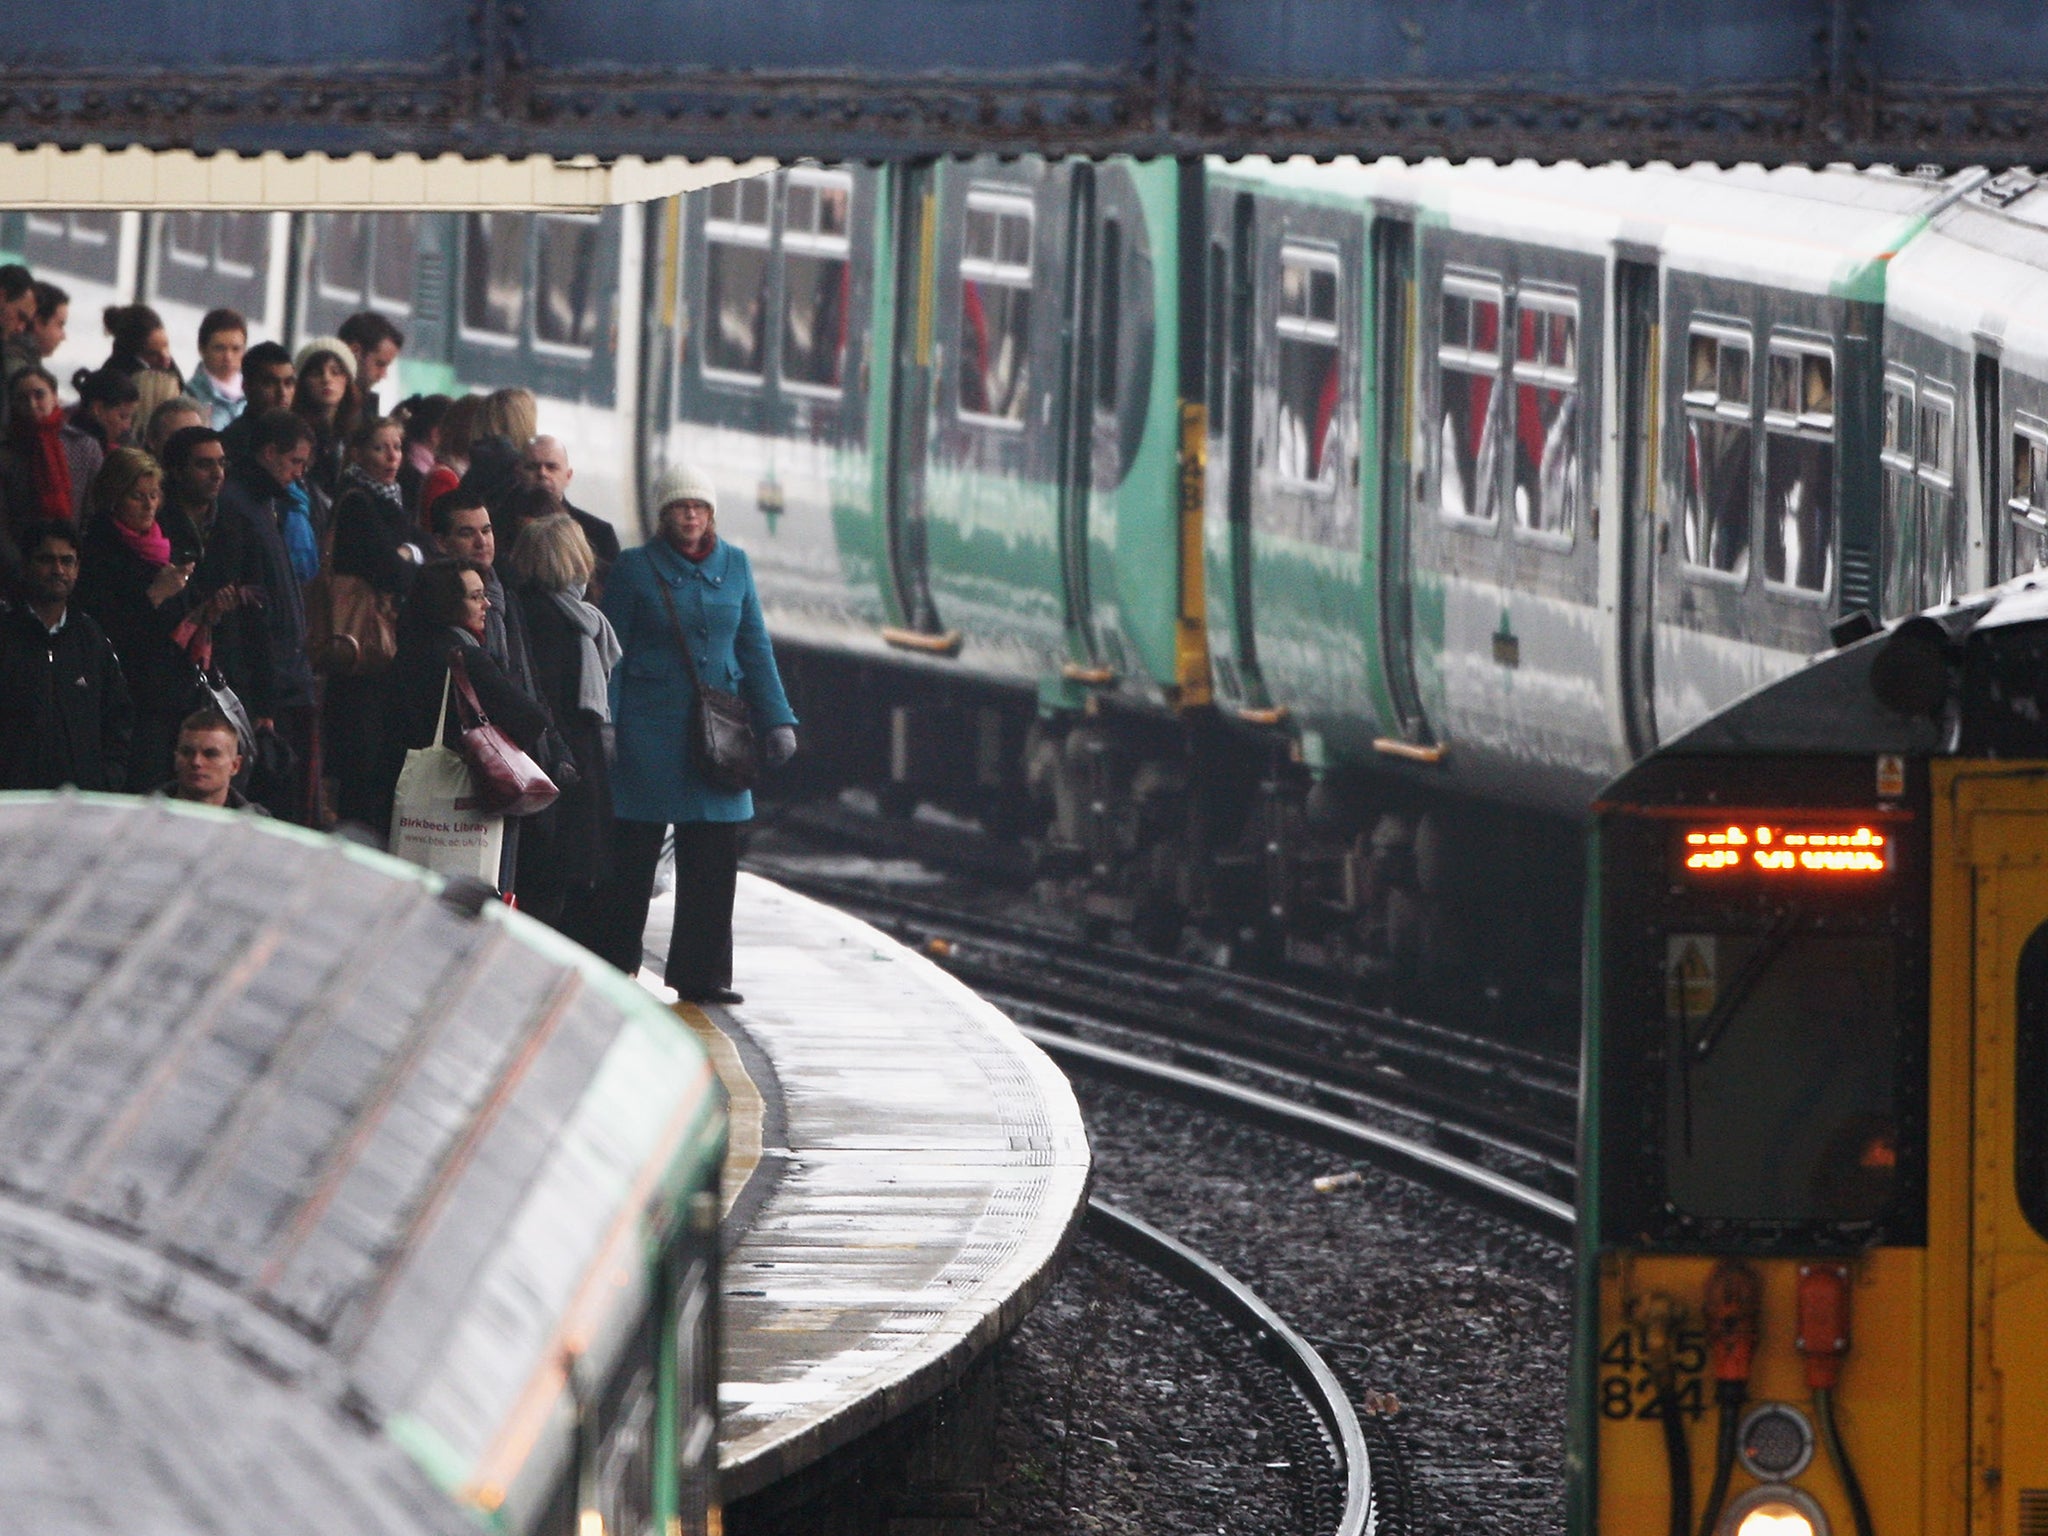 Metal pilfering from the railways reached its zenith in 2011, resulting in more 365,000 minutes of delay